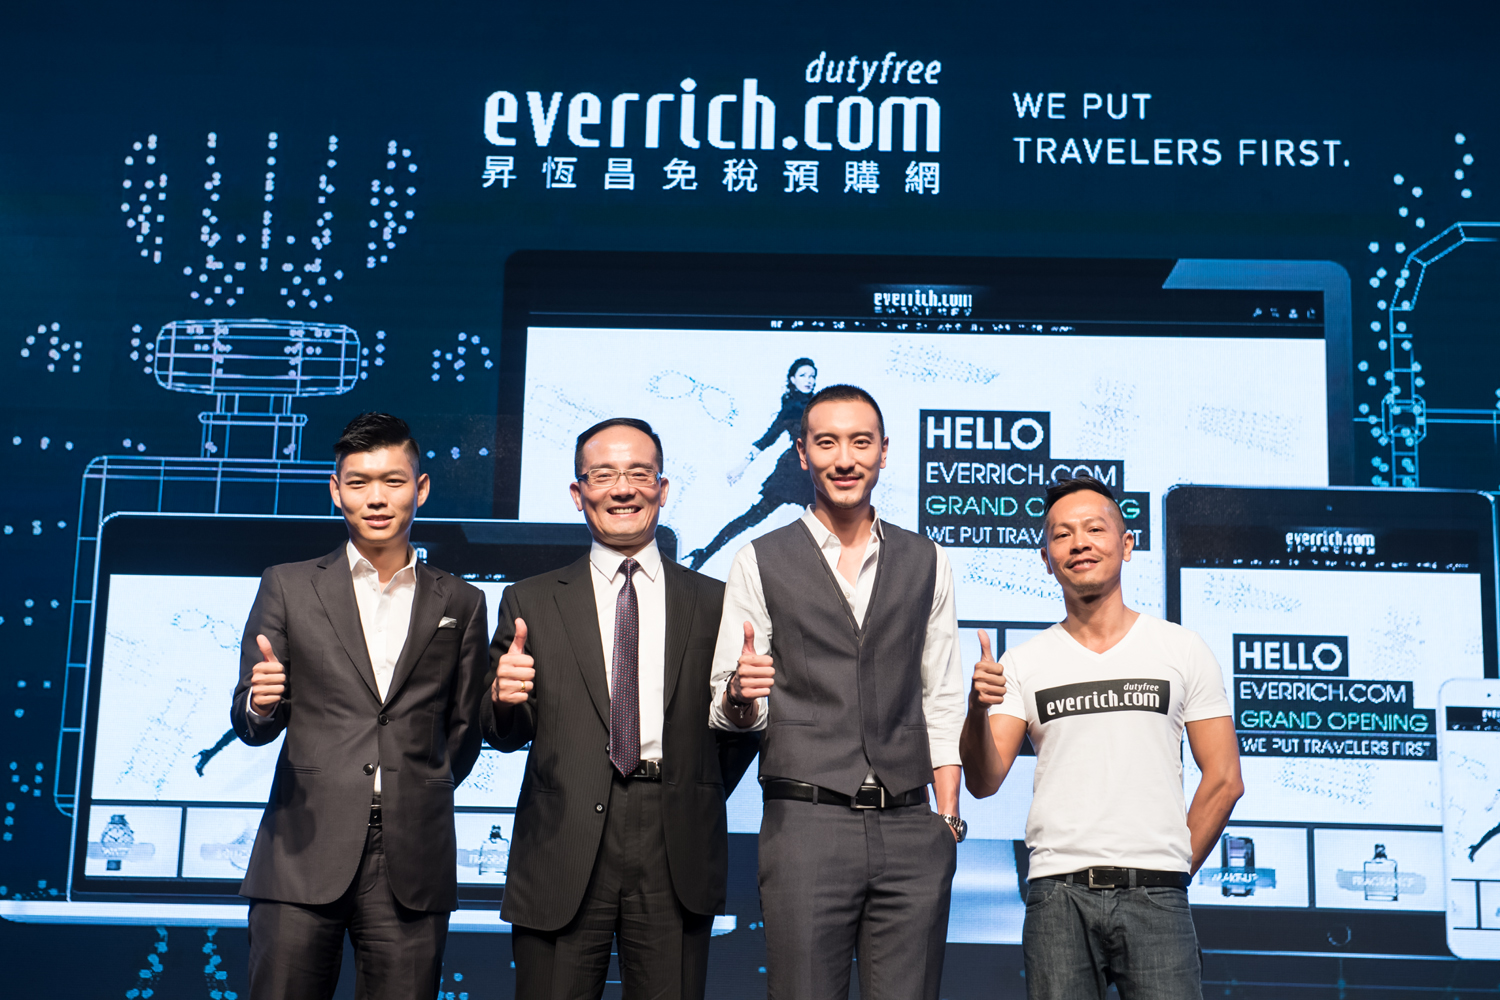 L-R: Ever Rich Duty Free President Kevin Chiang, Vice Chairman Sam Wu, actor Sunny Wang and Ever Rich Marketing Manager Markus Chang at the press conference